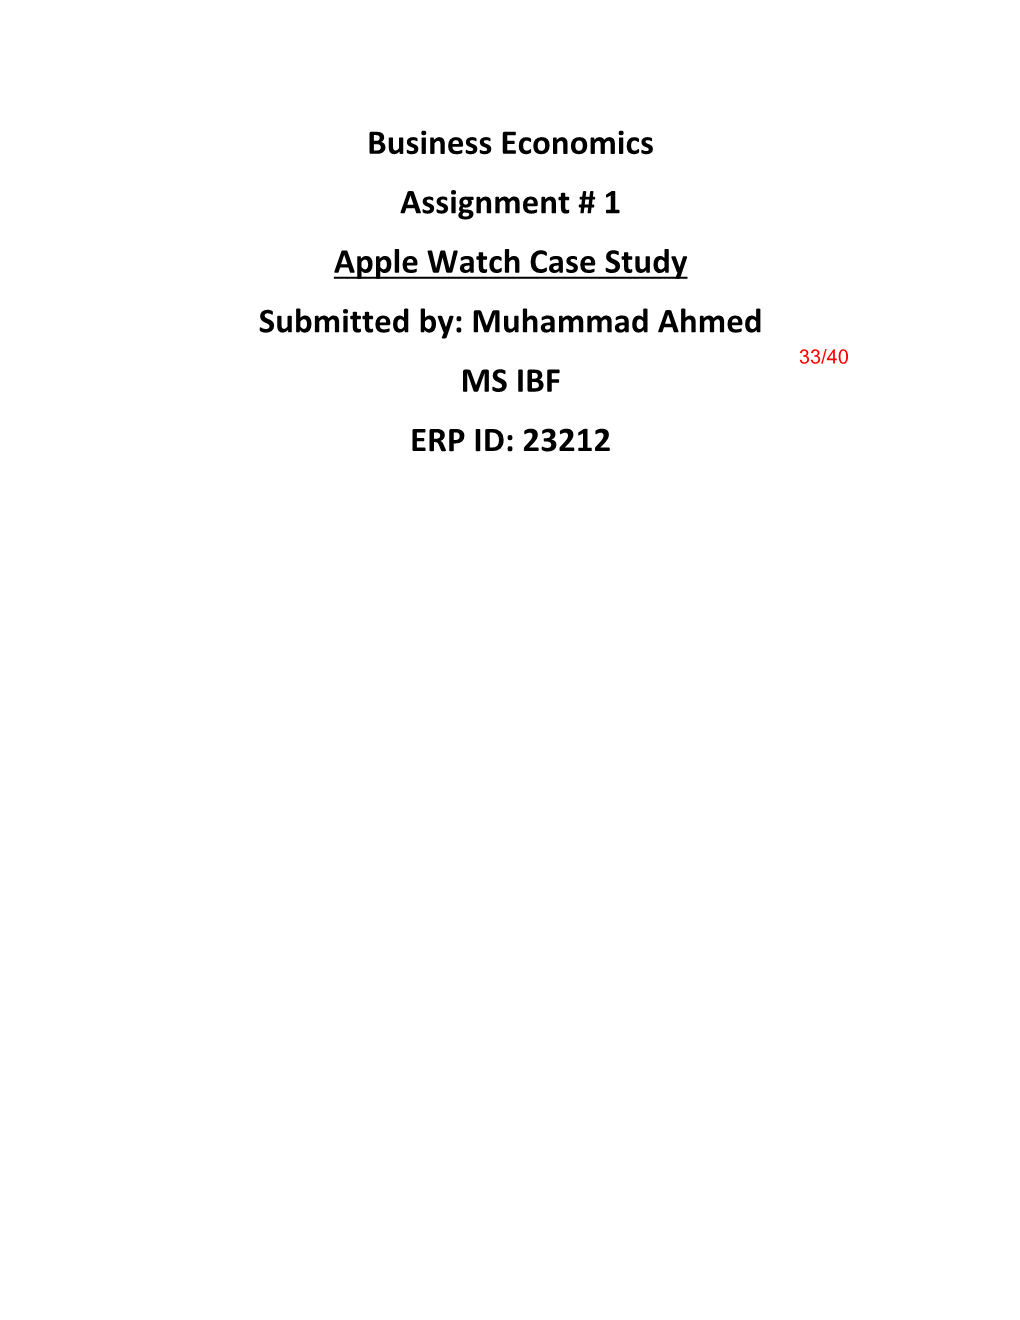 Business Economics Assignment # 1 Apple Watch Case Study Submitted By: Muhammad Ahmed MS IBF